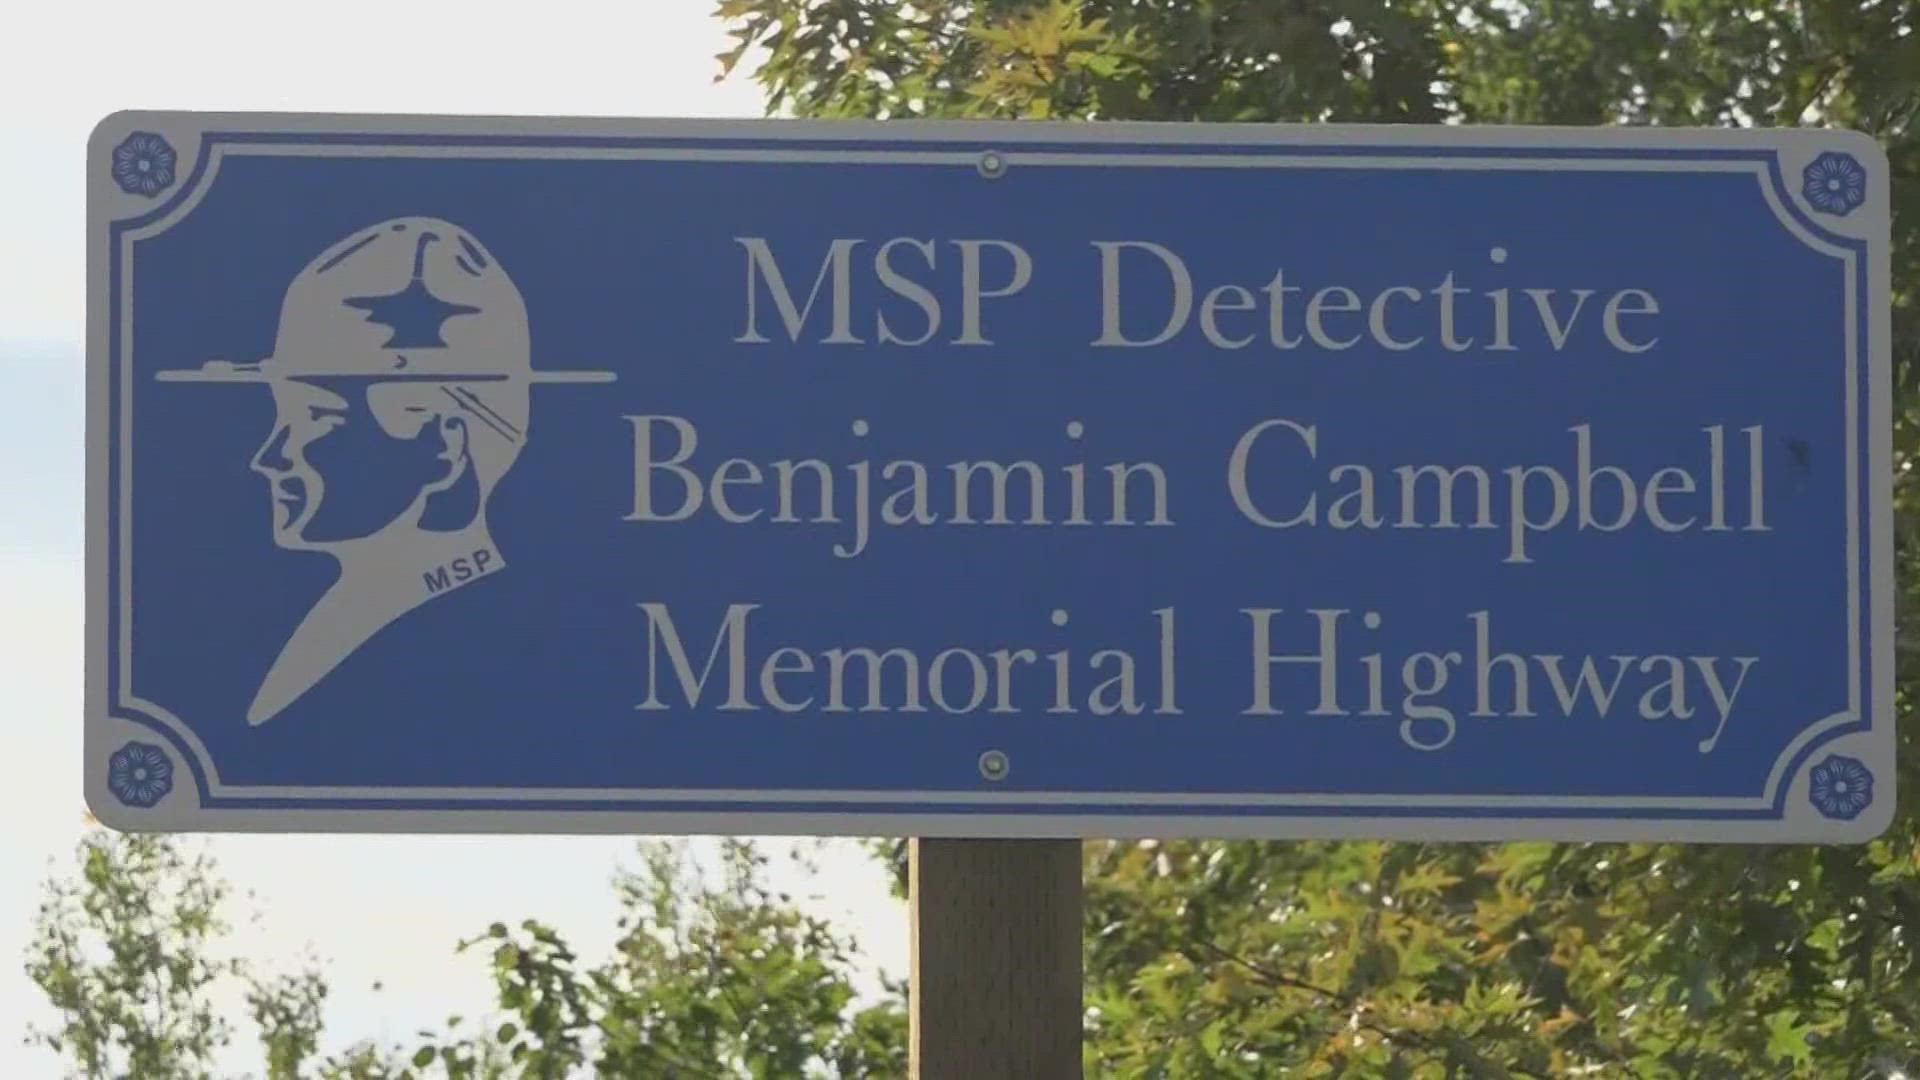 Family, friends and coworkers of Detective Benjamin Campbell gathered on a part of route 202 to unveil and dedicate the memorial sign.